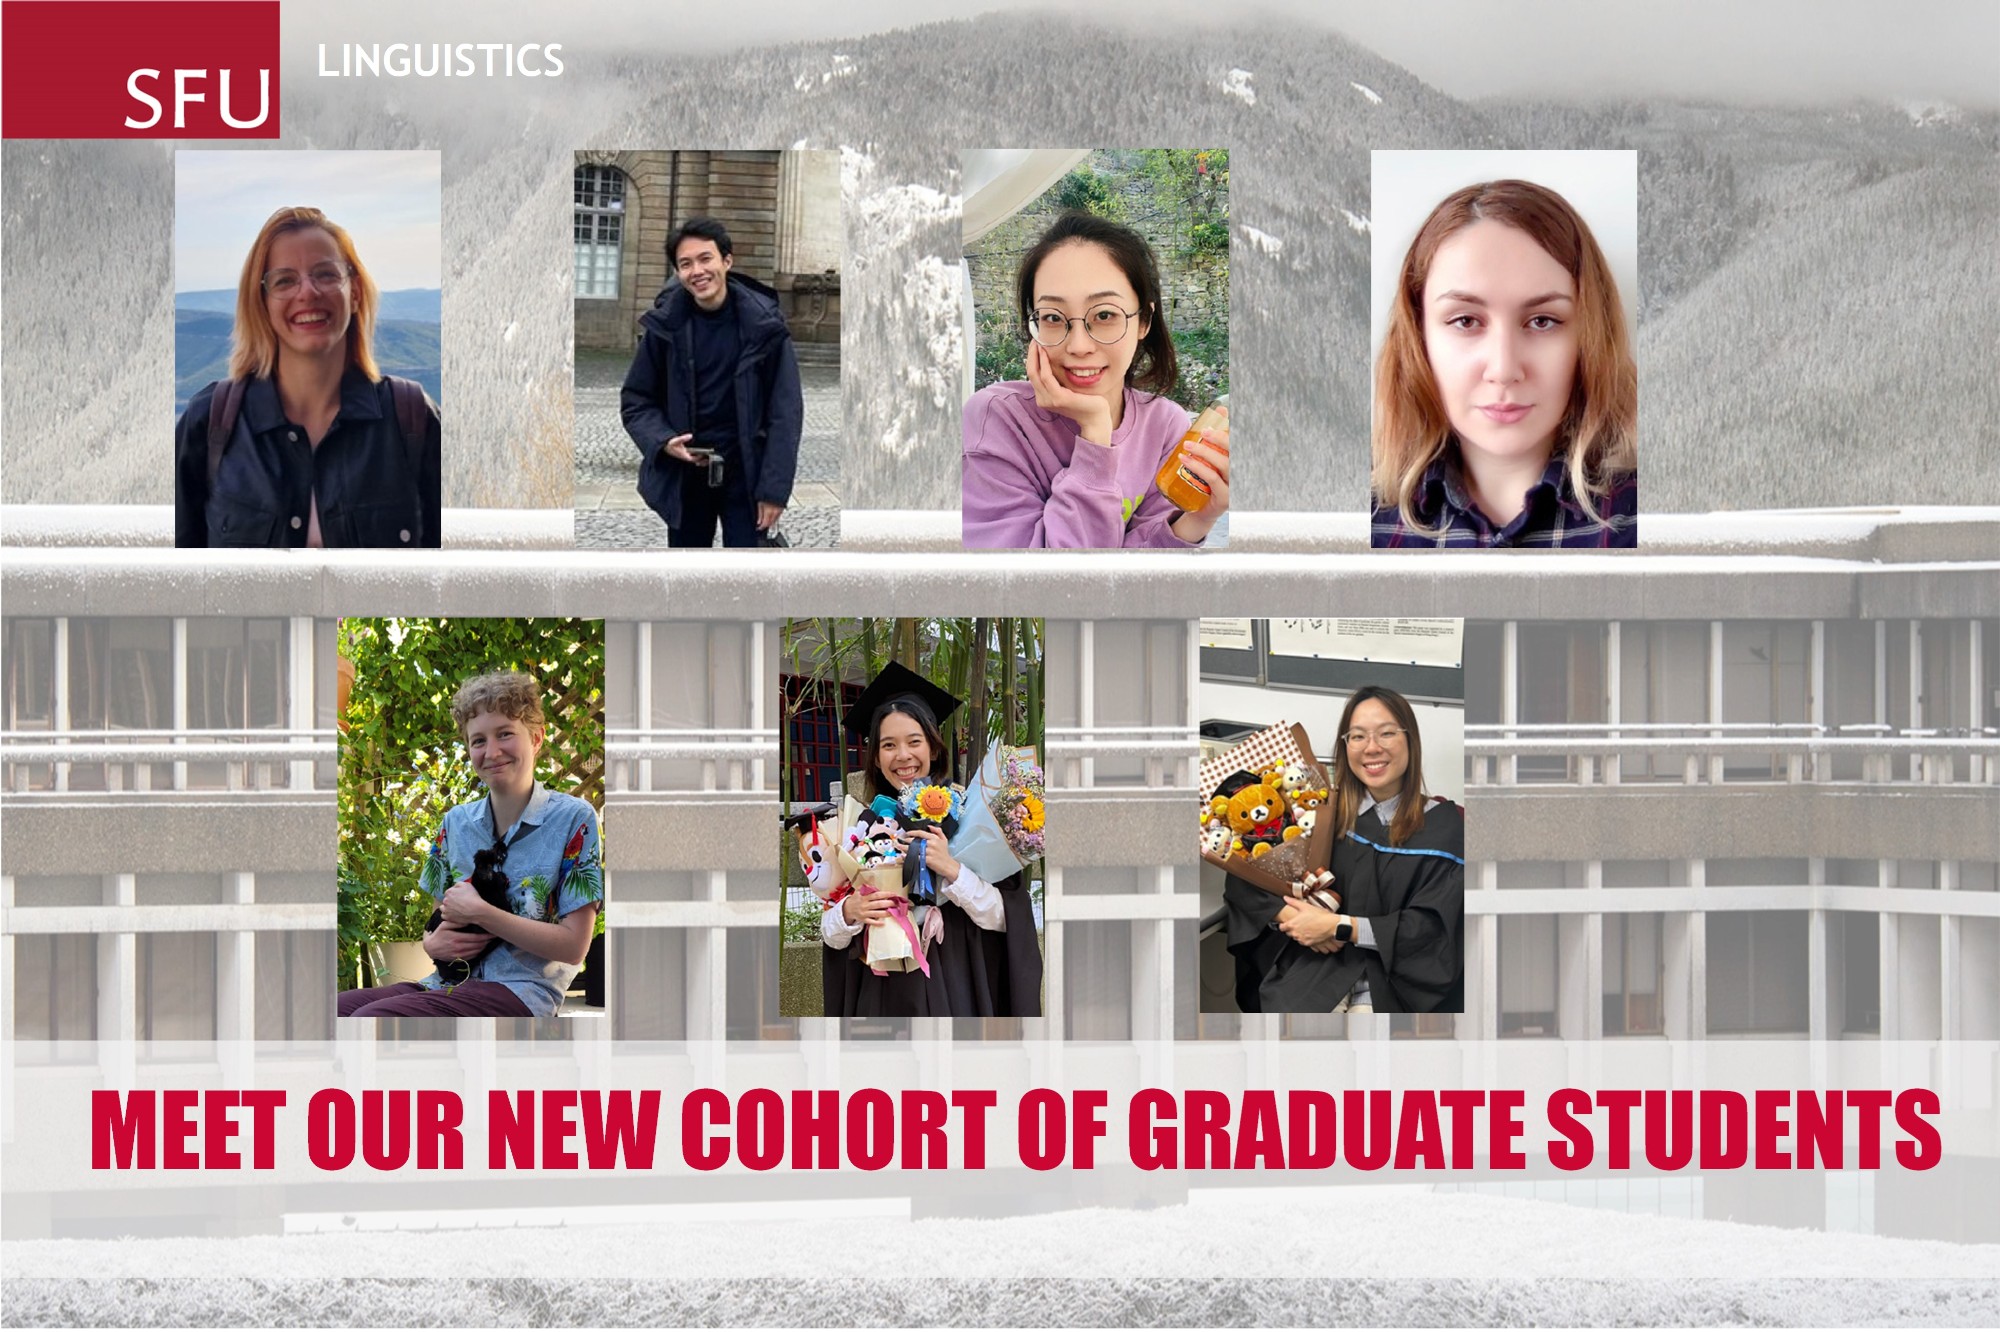 Meet our new cohort of graduate students!